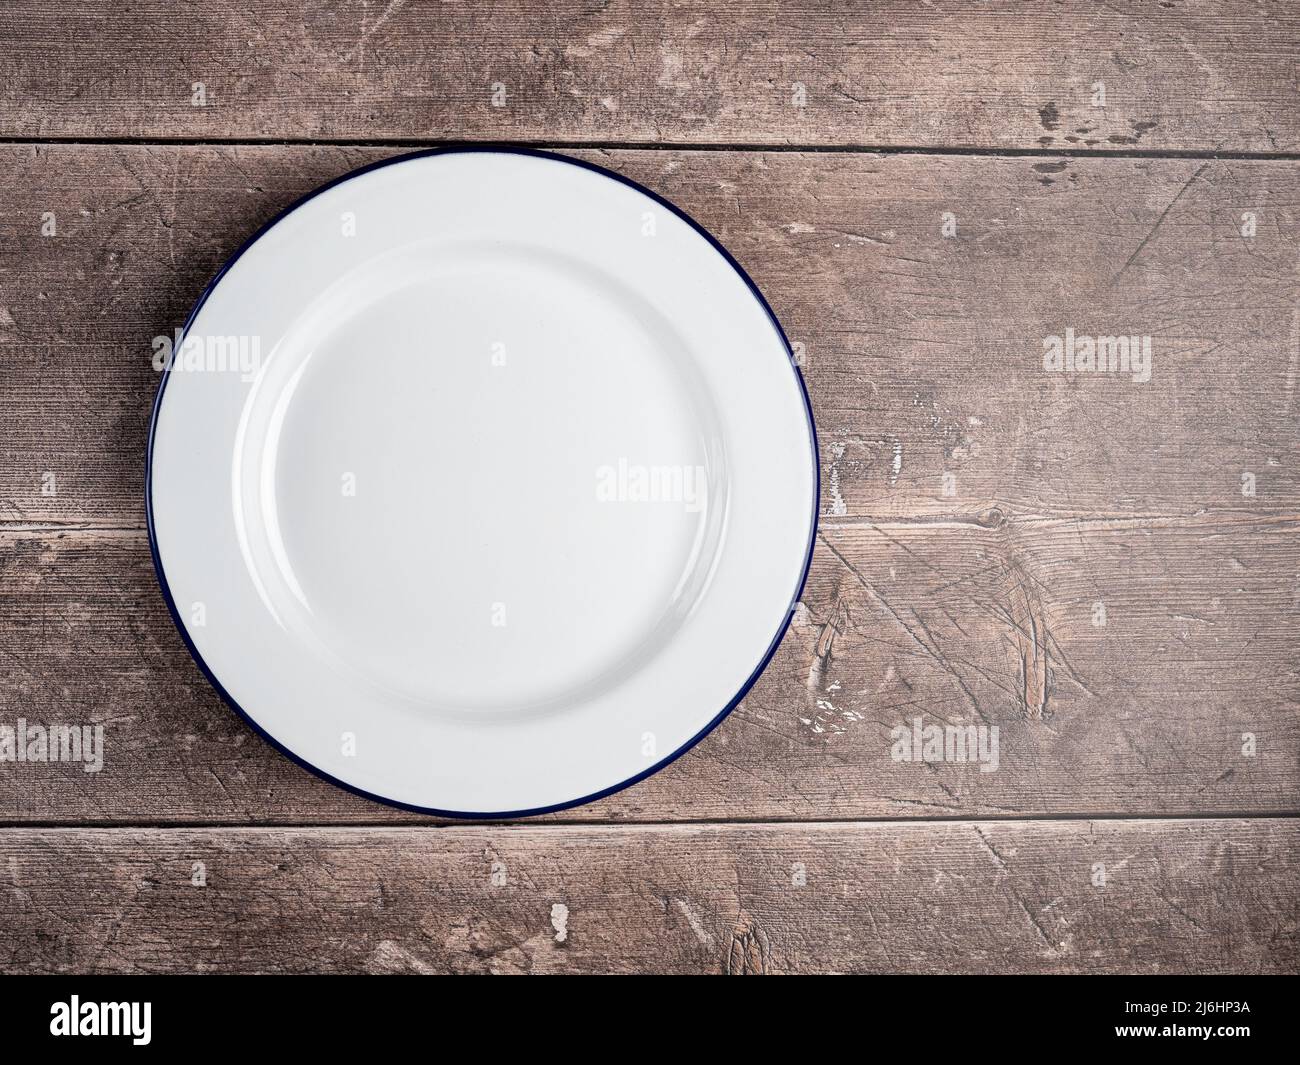 isolated traditional White Enamel plate with navy blue rim used for baking and cooking on a rustic wooden table background Stock Photo